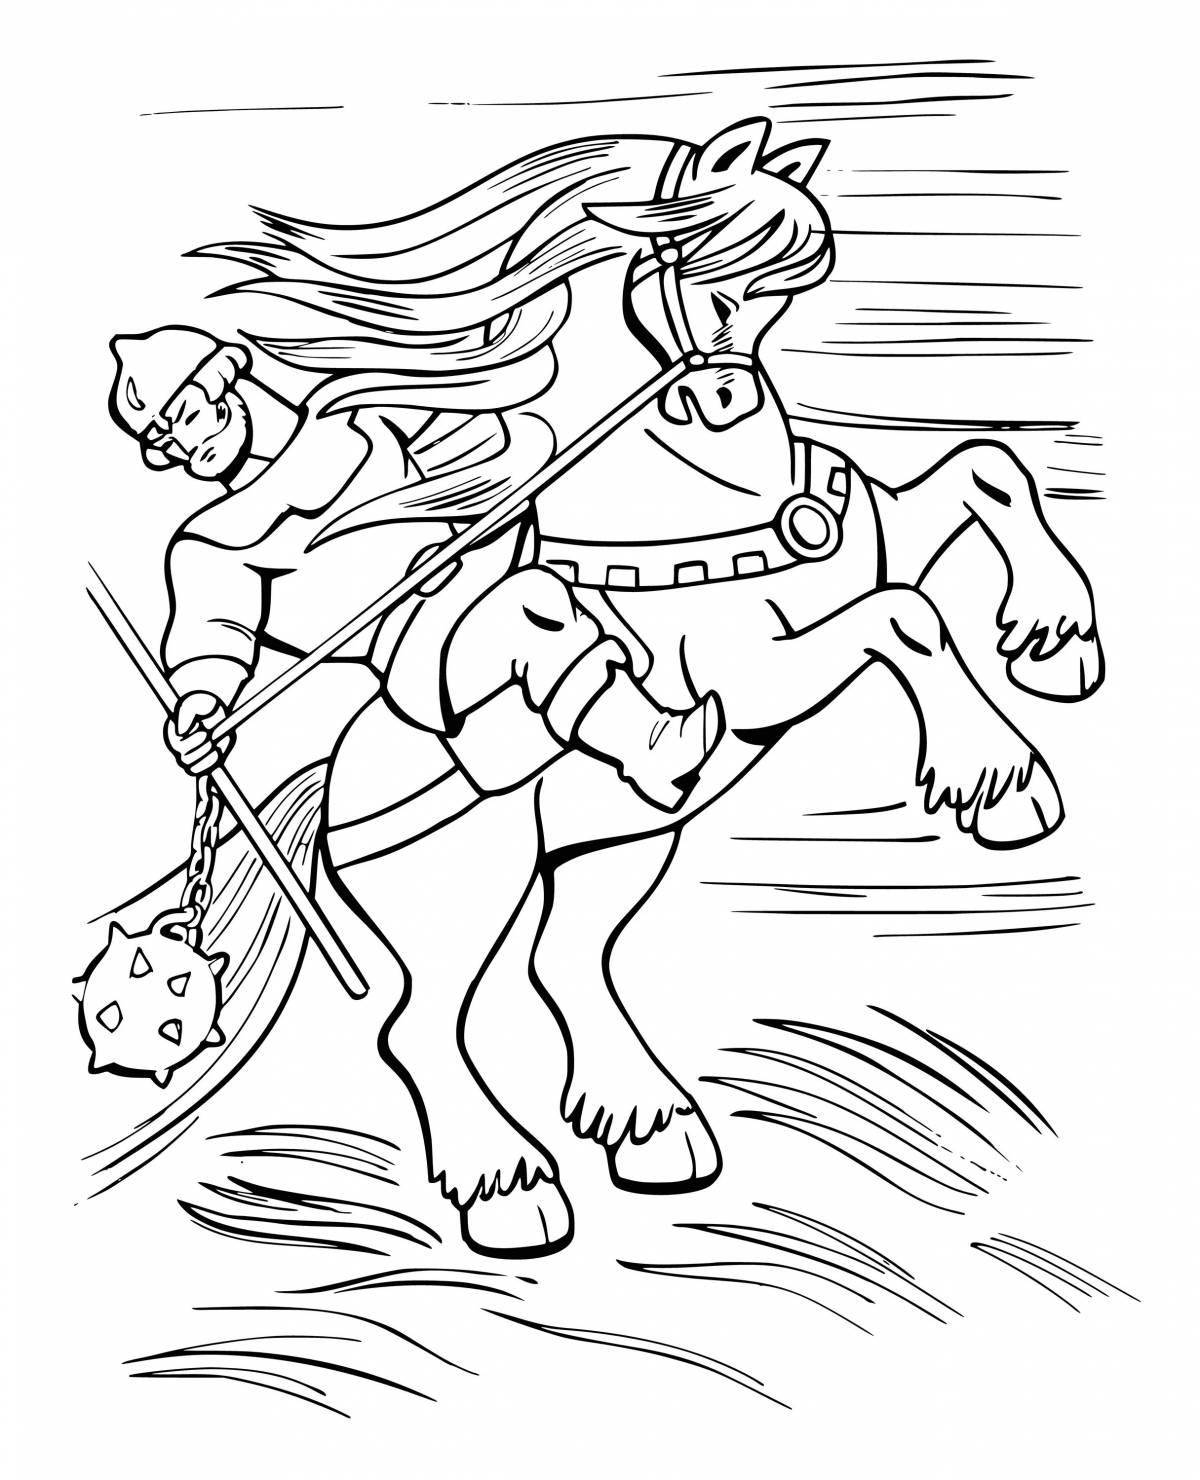 Colorful nightingale robber coloring page